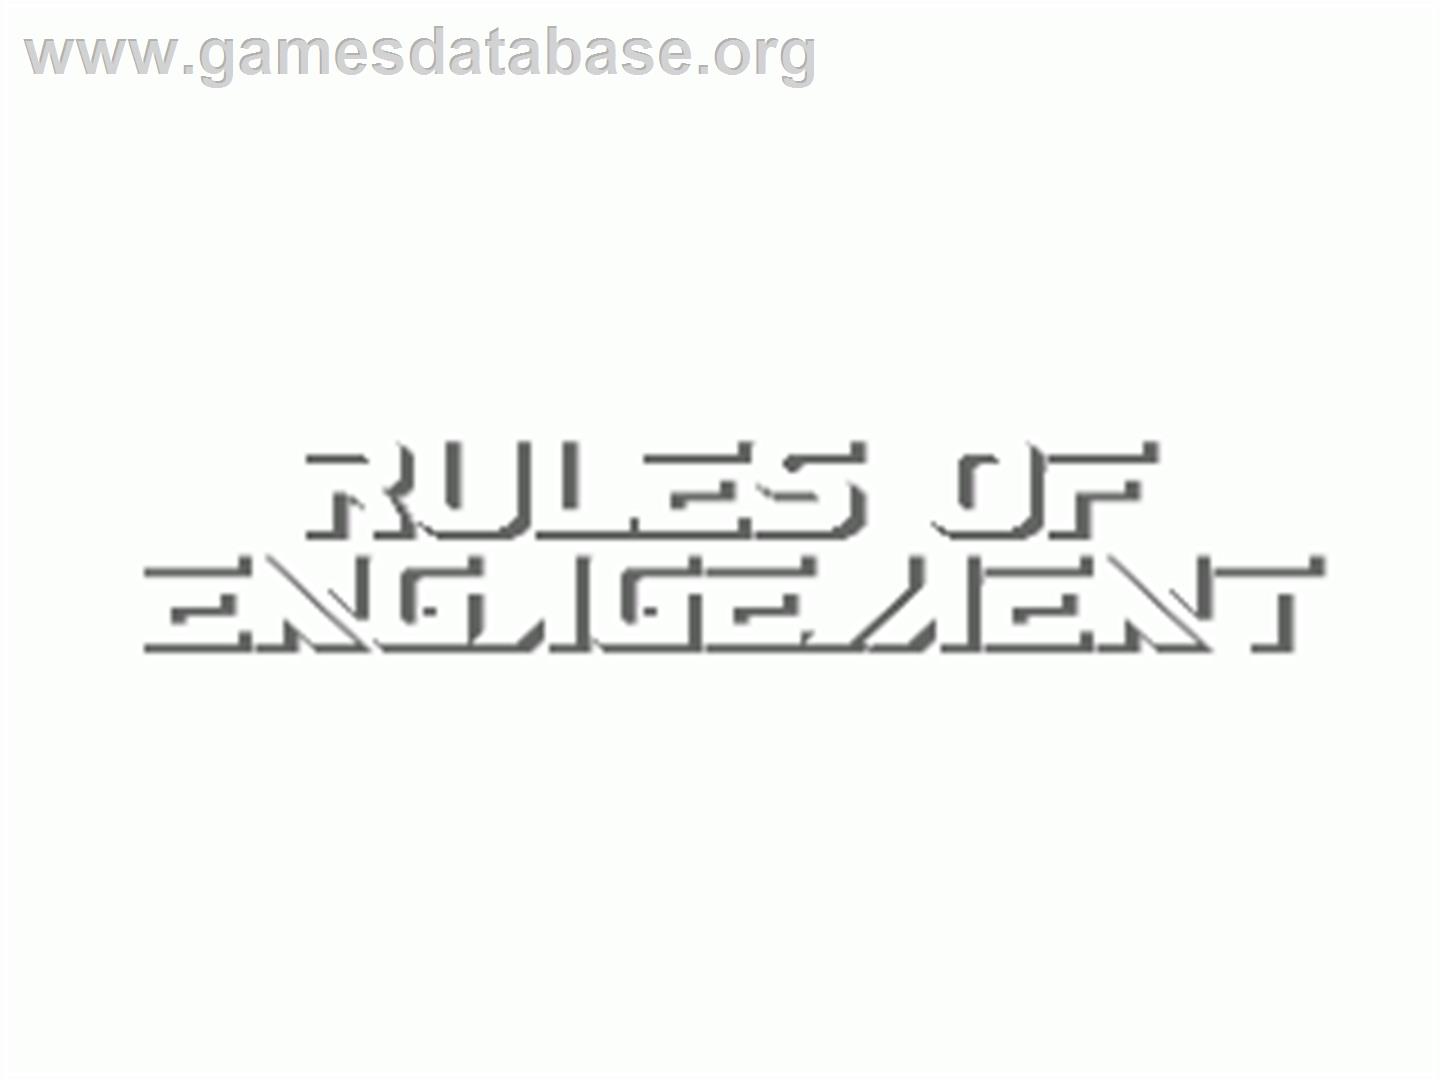 Rules of Engagement - Commodore Amiga - Artwork - Title Screen